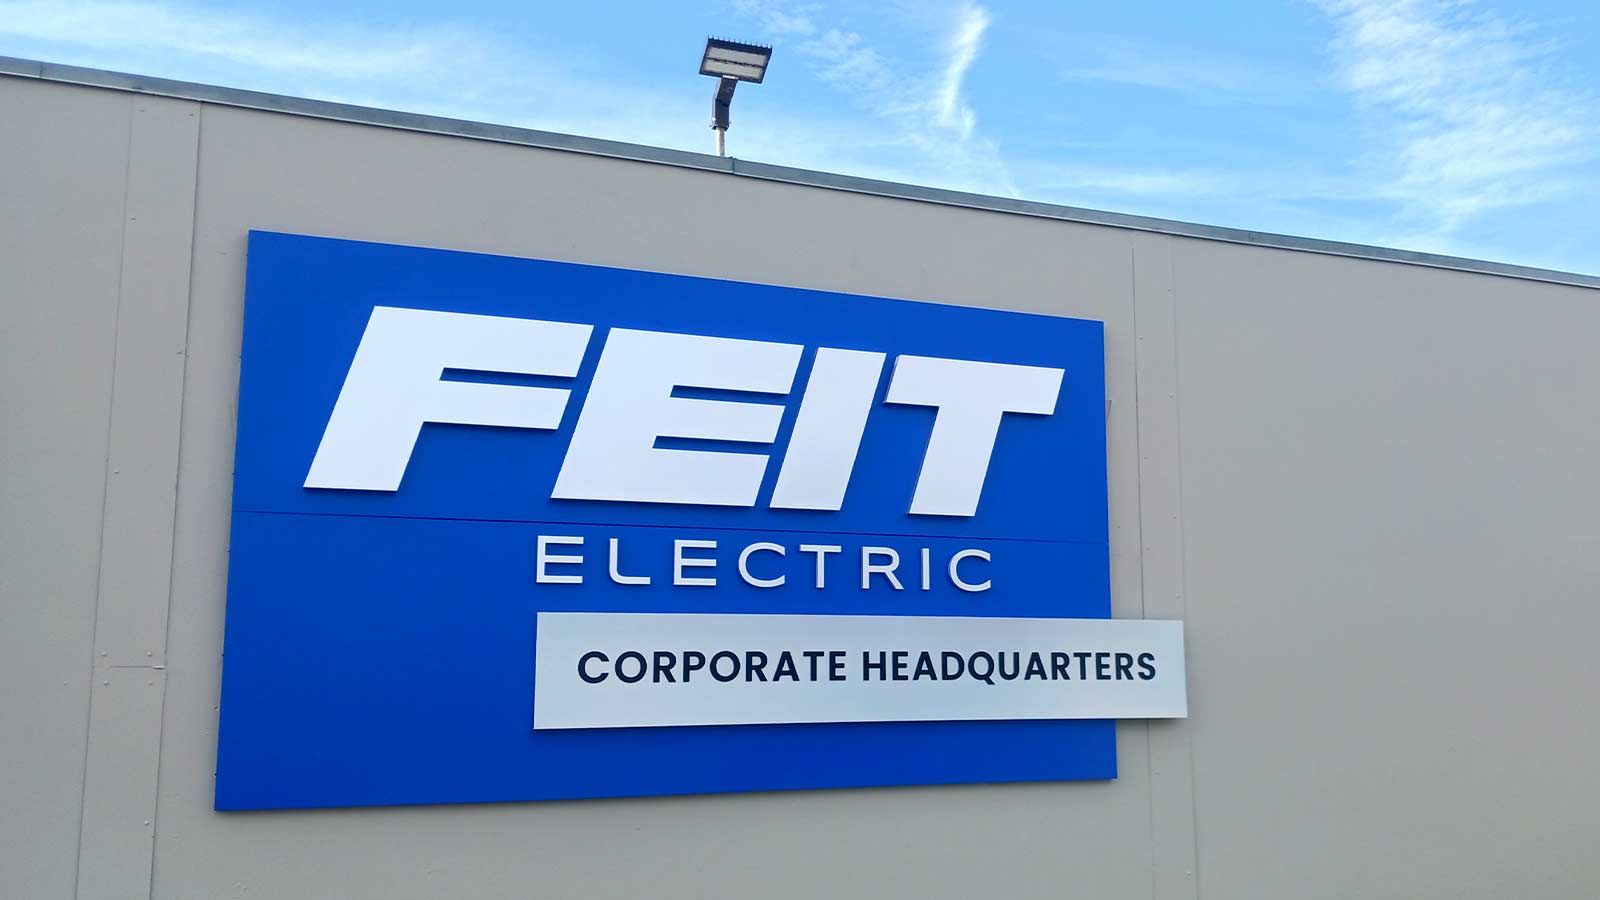 Feit Electric building top sign